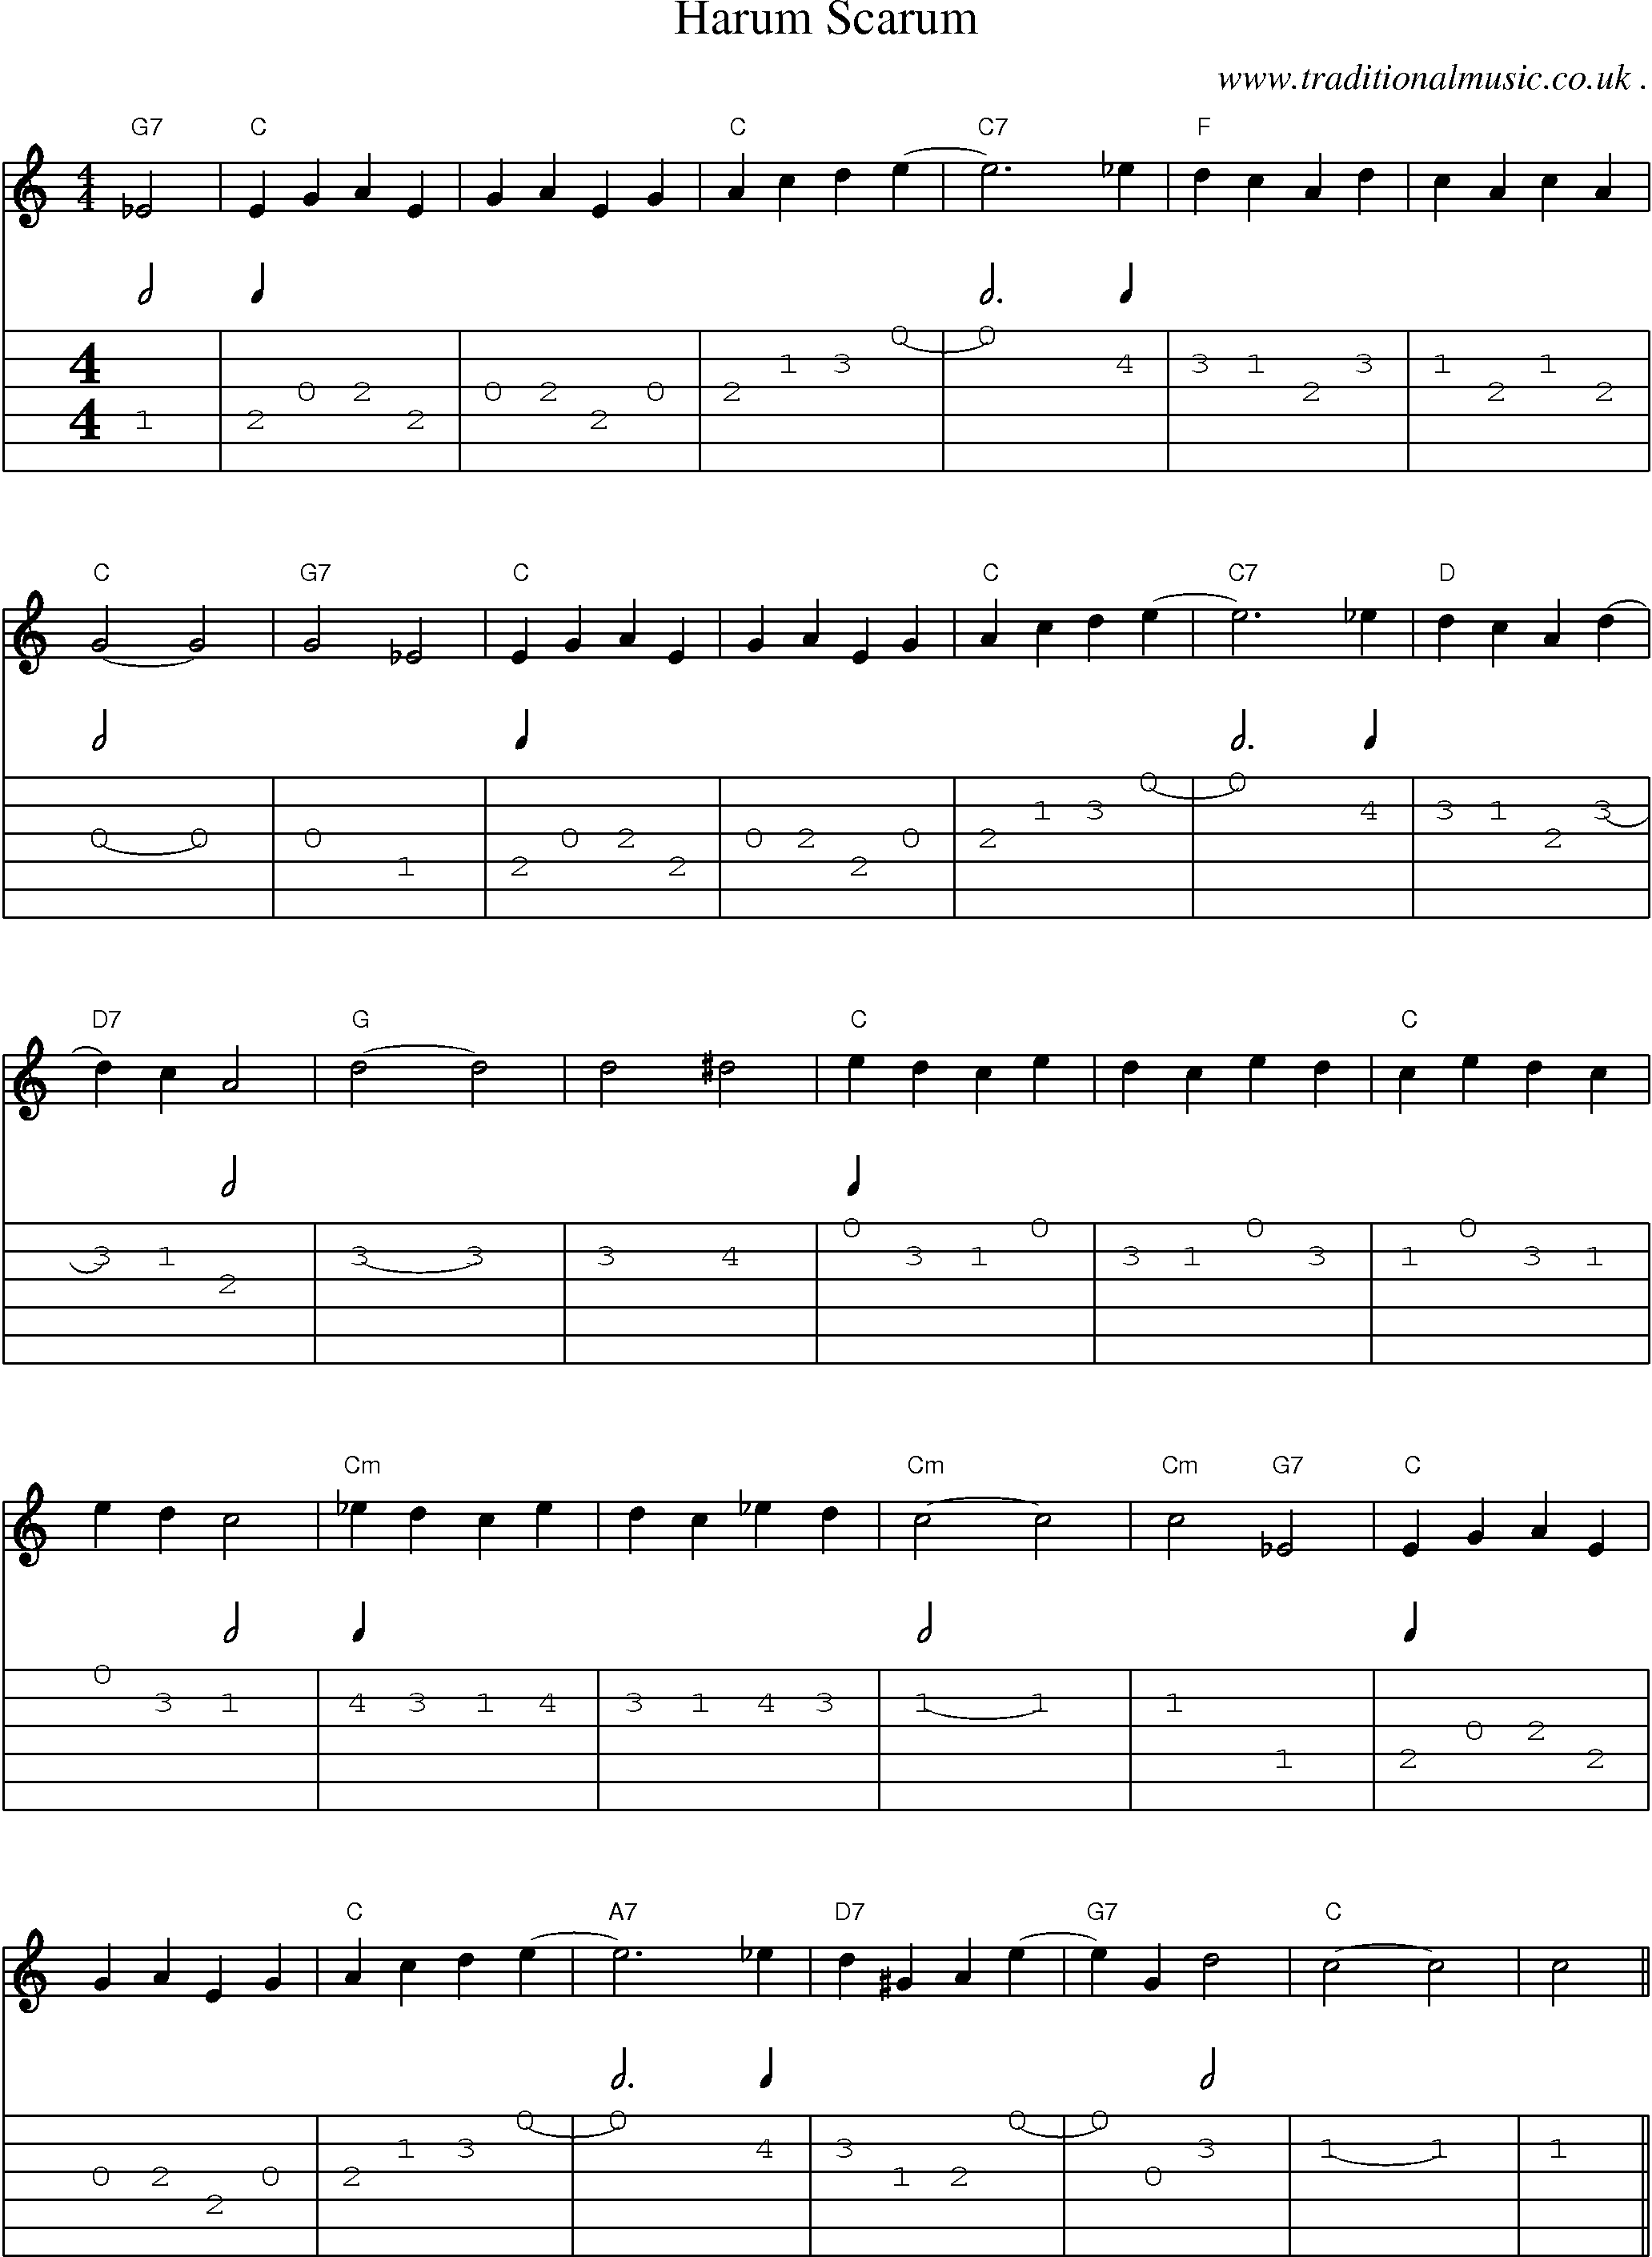 Sheet-Music and Guitar Tabs for Harum Scarum